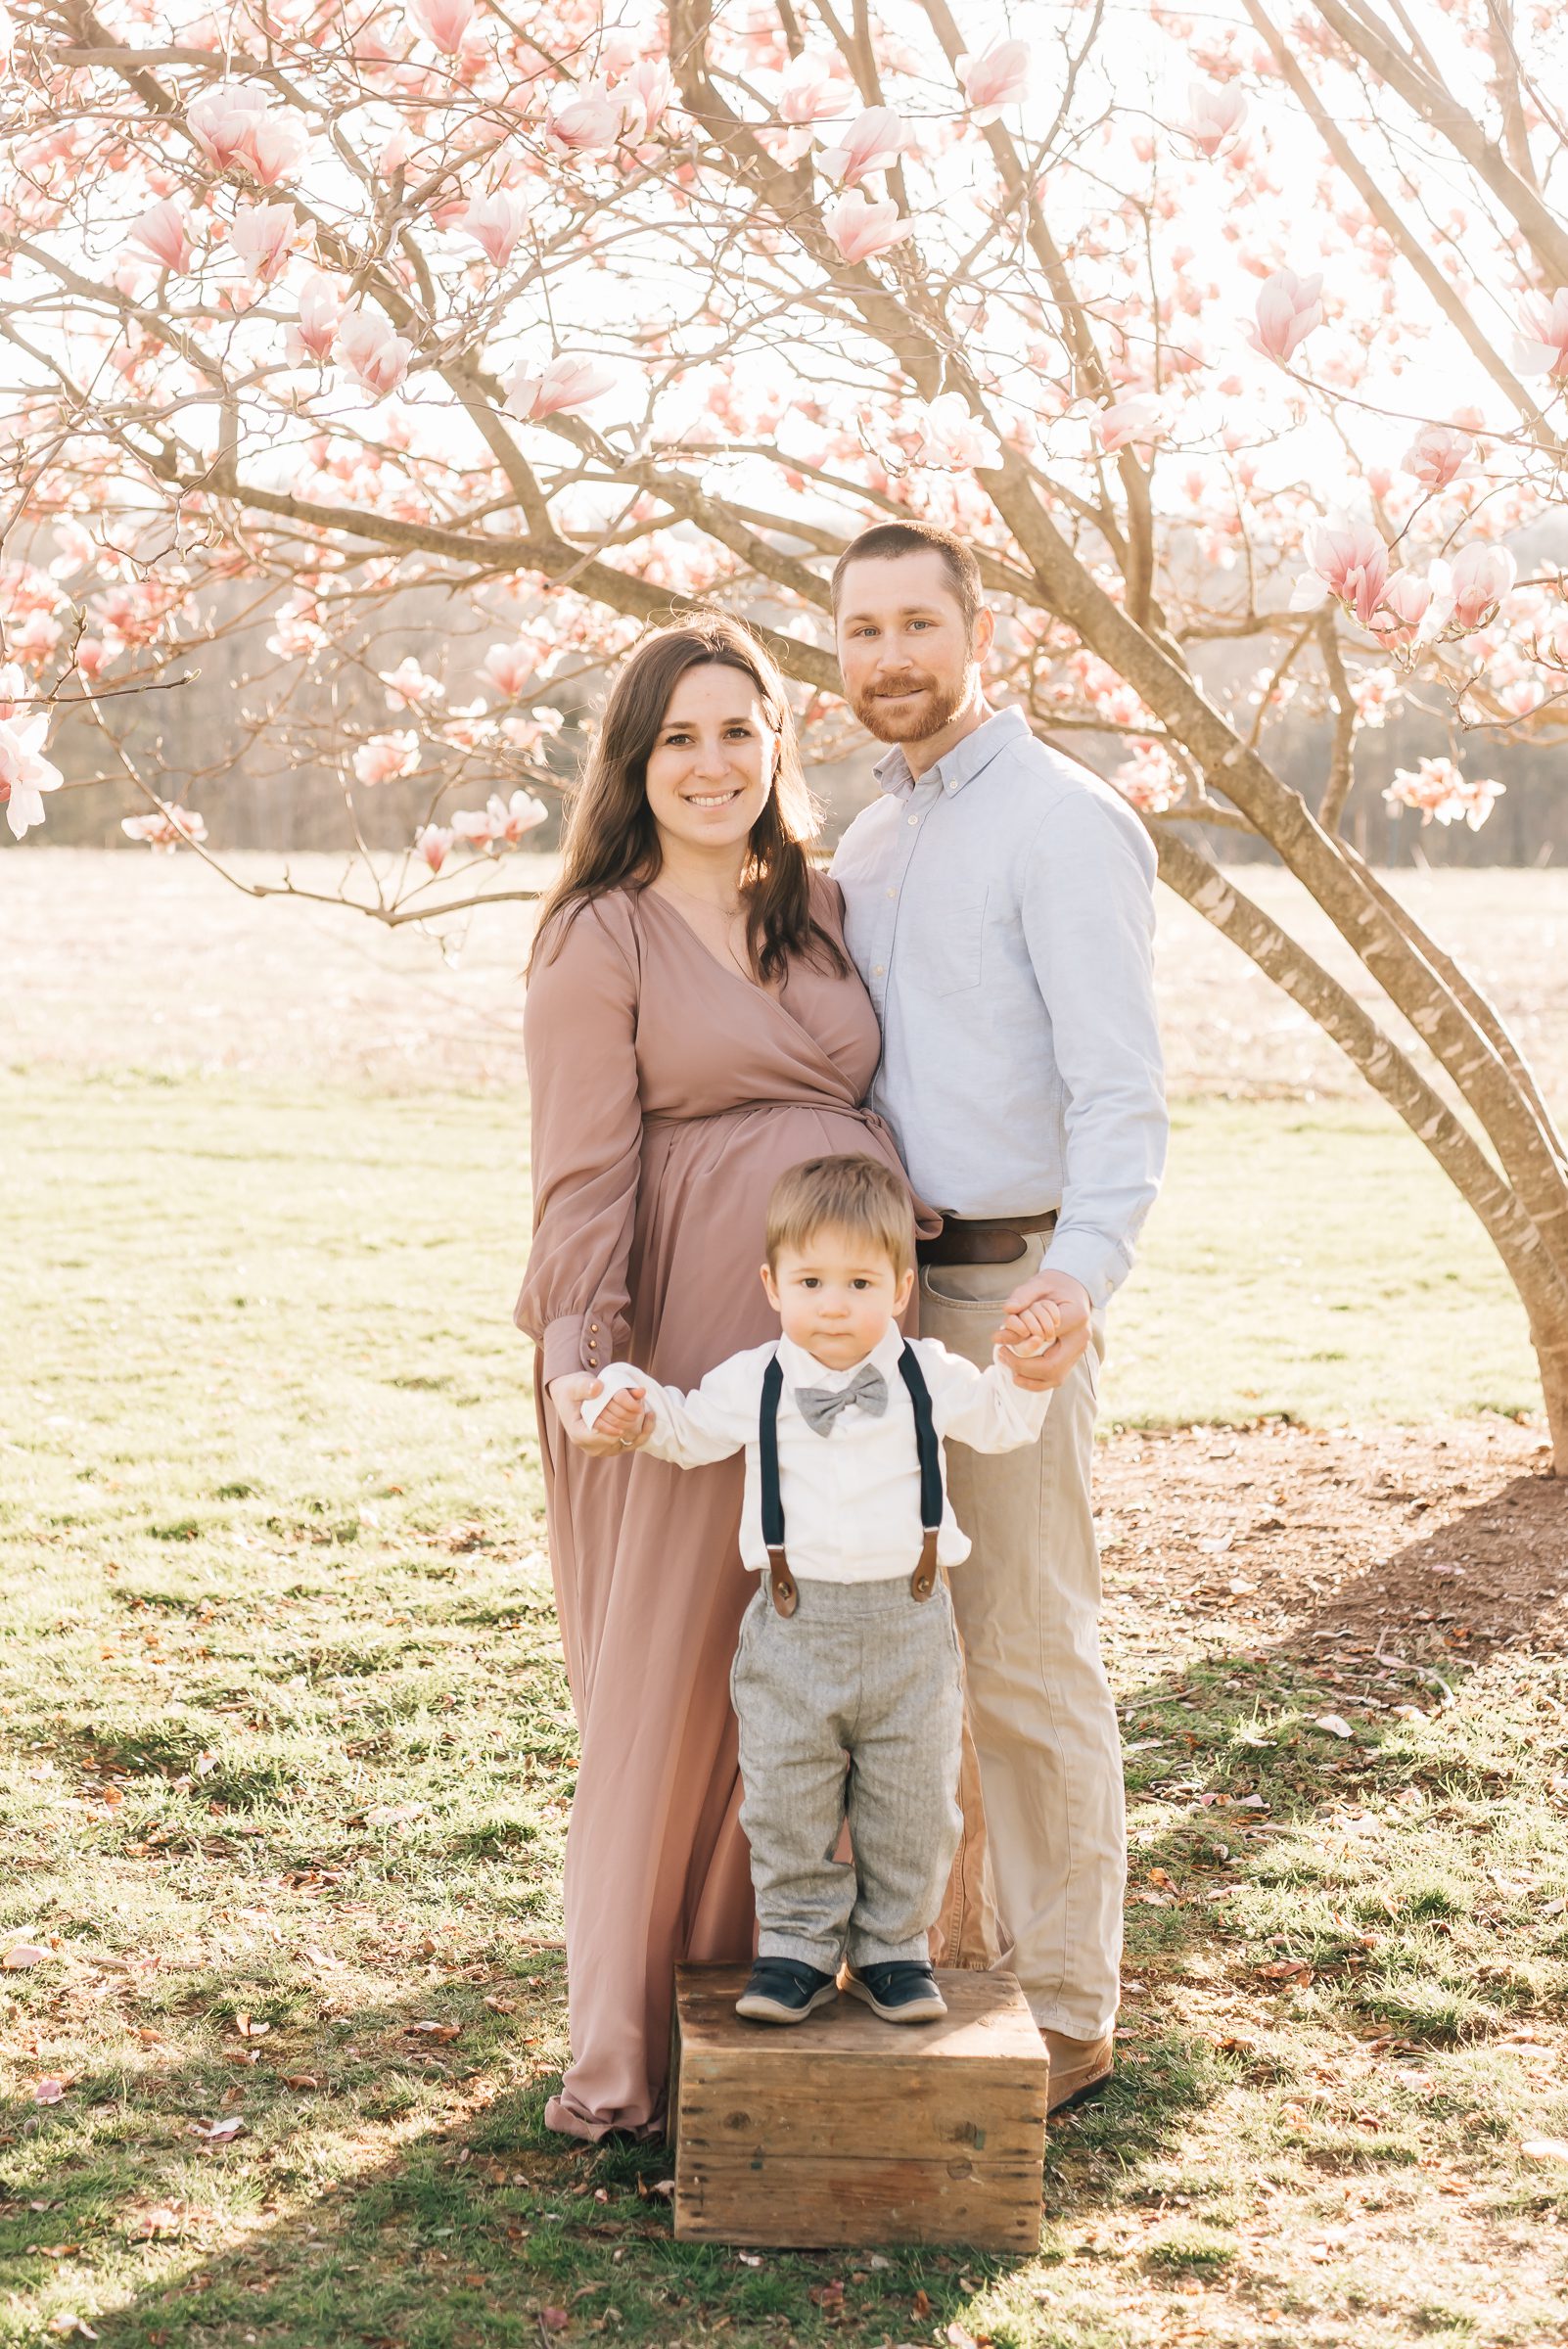 Picture is of a pregnant mom with her husband and son, during her spring blossom maternity session in West Hartford, Connecticut